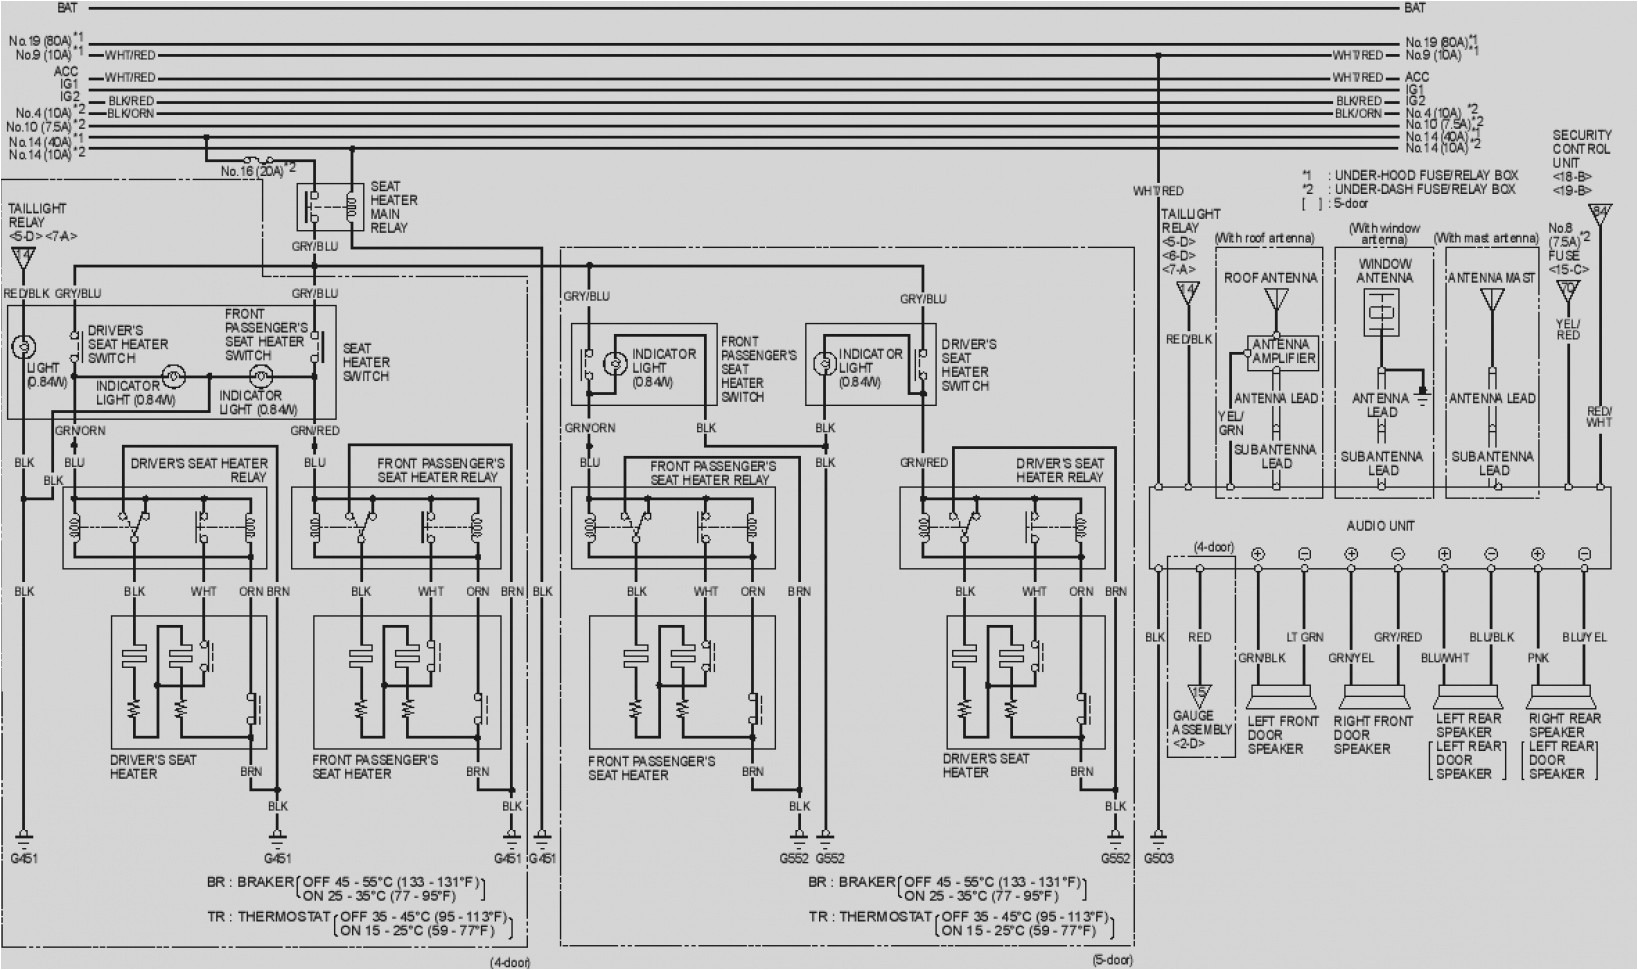 unique of 2010 honda civic ac wiring diagram the on my 2006 5 noticeable gif